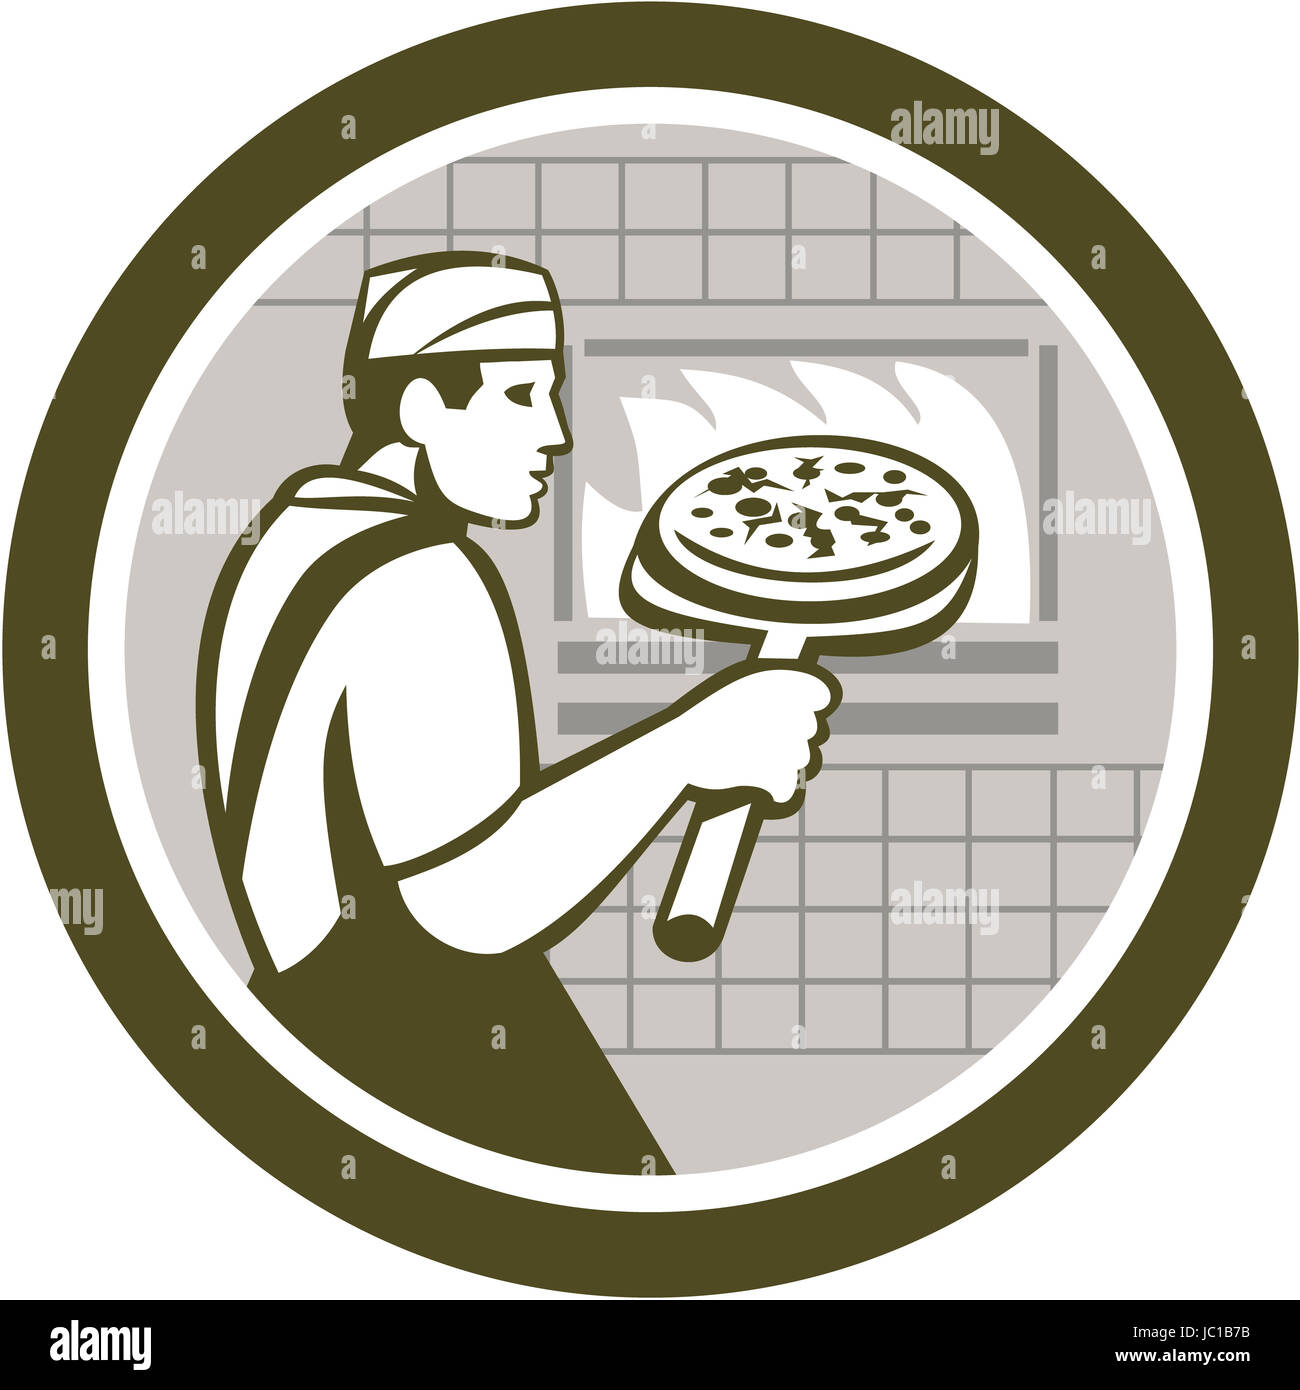 Illustration of a baker pizza maker holding a peel with pizza pie into a brick oven viewed from side done in retro style on isolated white background. Stock Photo